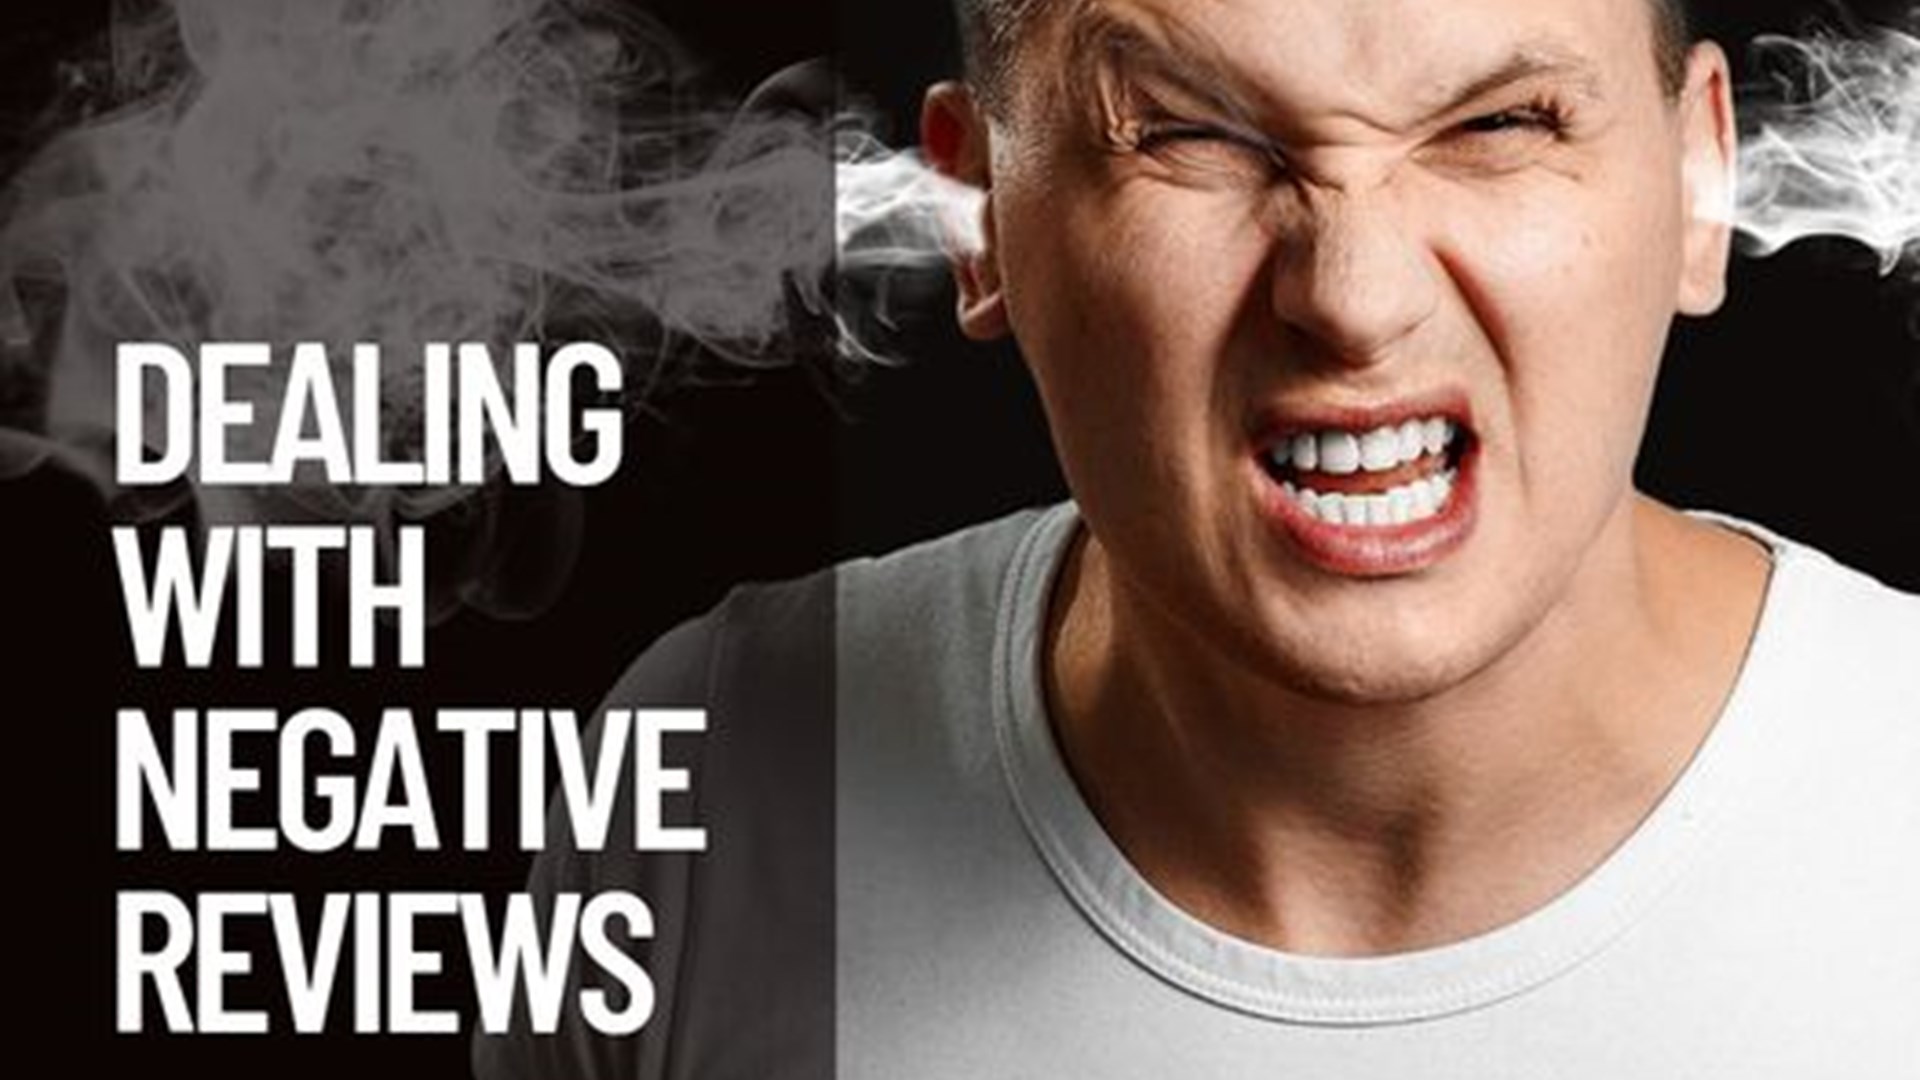 How to deal with negative reviews without blowing your lid